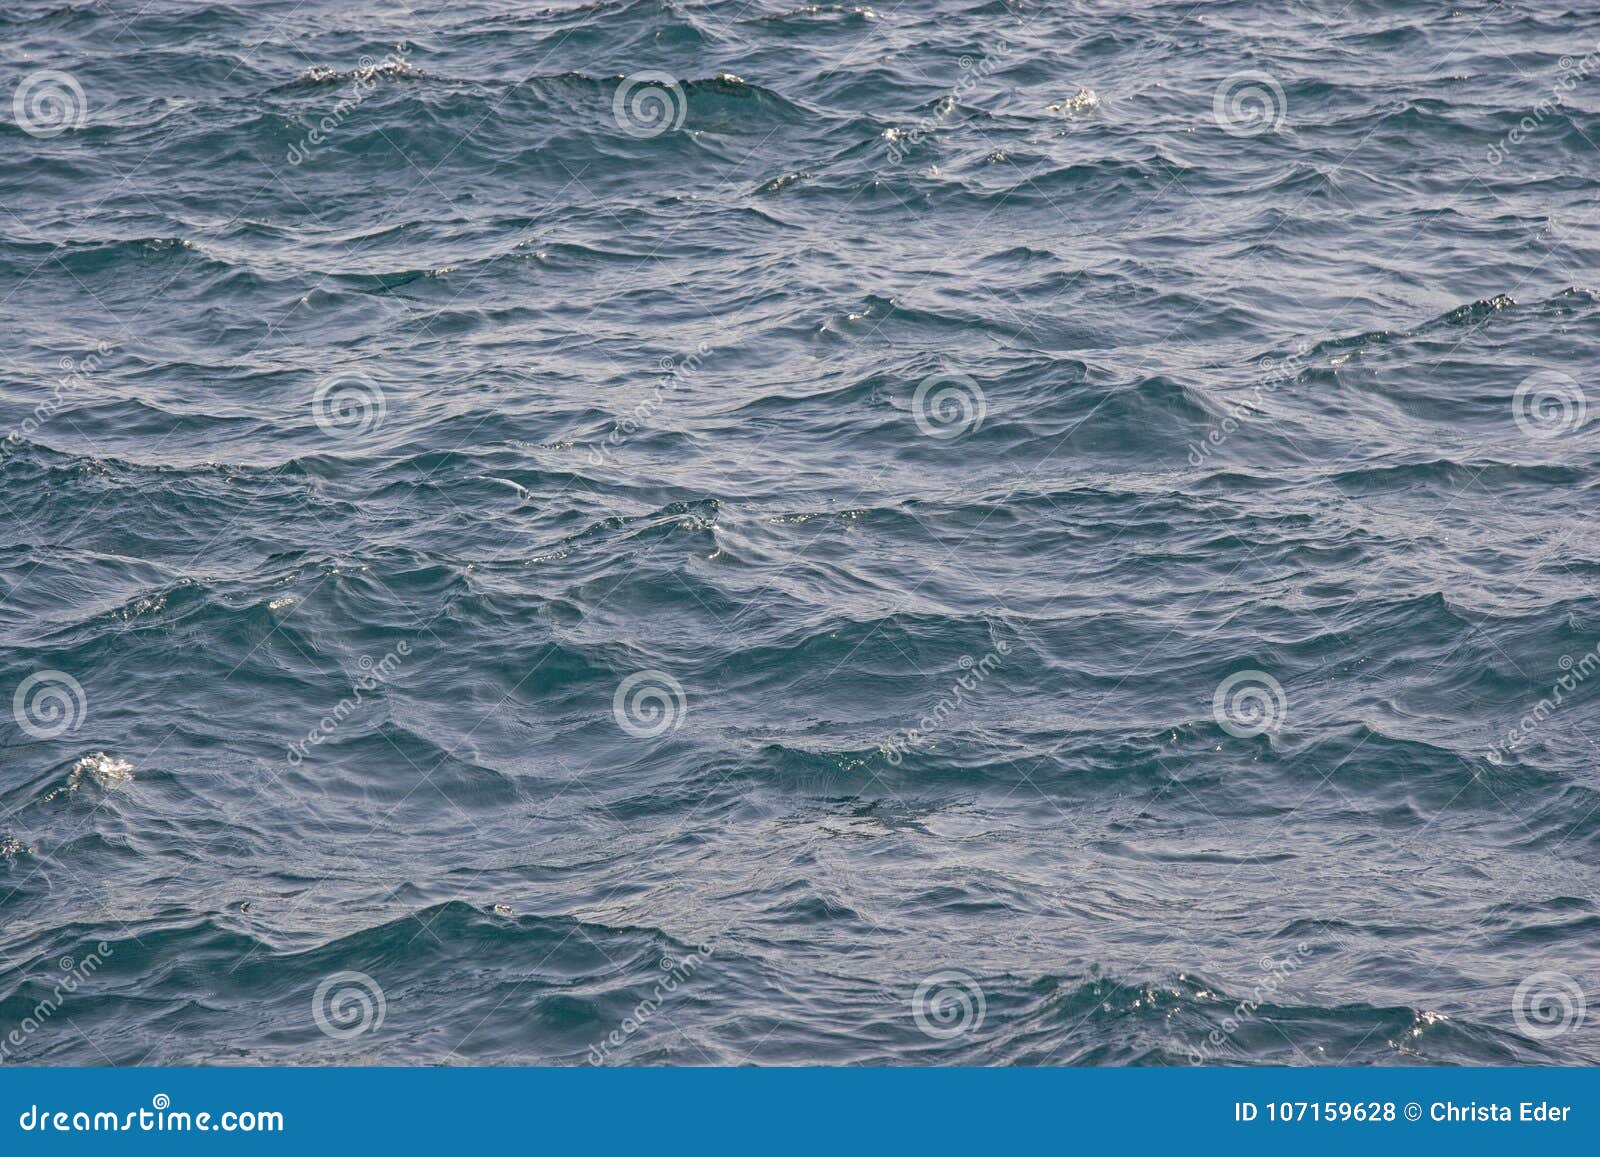 Closeup Of A Moving Water Background, Water Stock Movies, Royaltyfree  Footage, Aesthetic Teal Pictures Background Image And Wallpaper for Free  Download